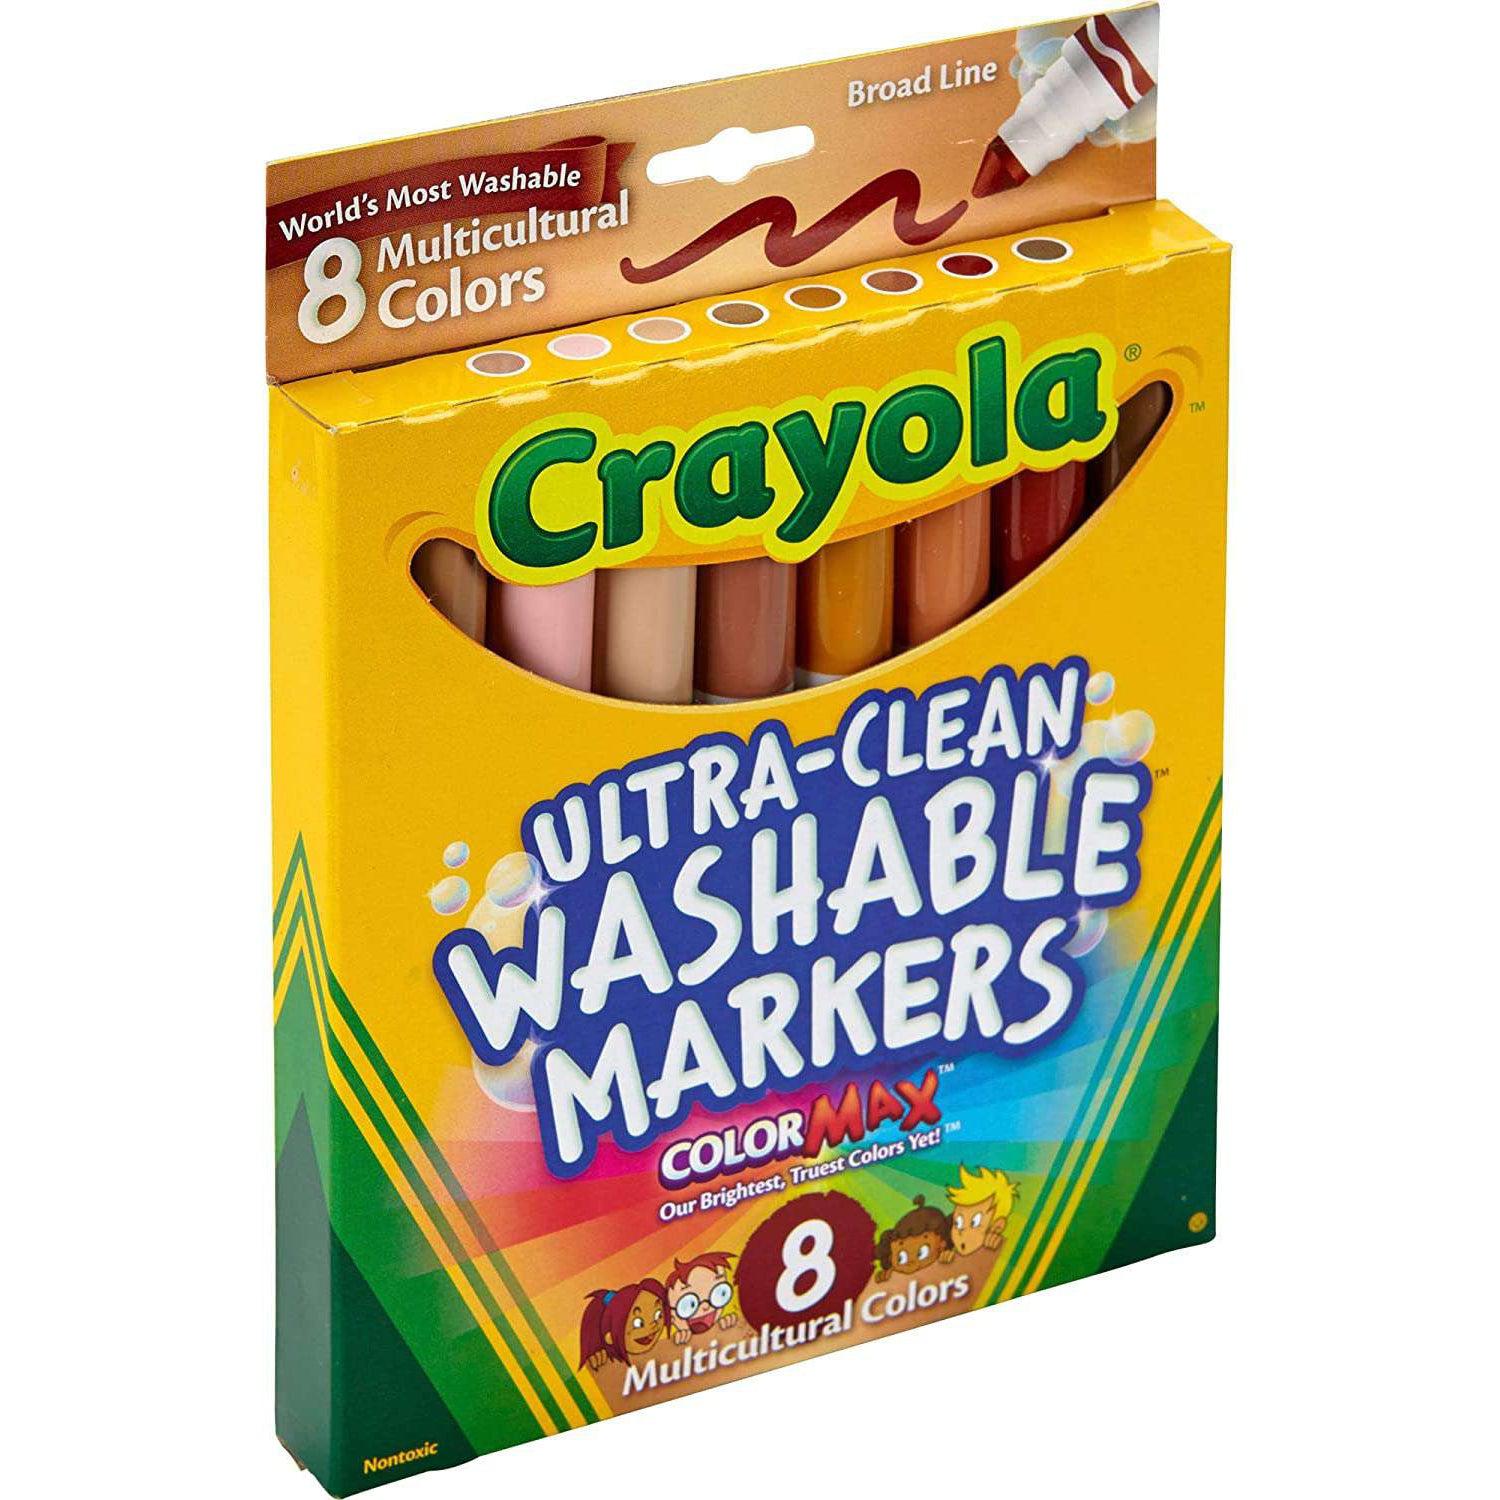 Crayola-Crayola 8 Count Ultra-Clean Washable Markers - Multicultural Colors-58-7801-Legacy Toys